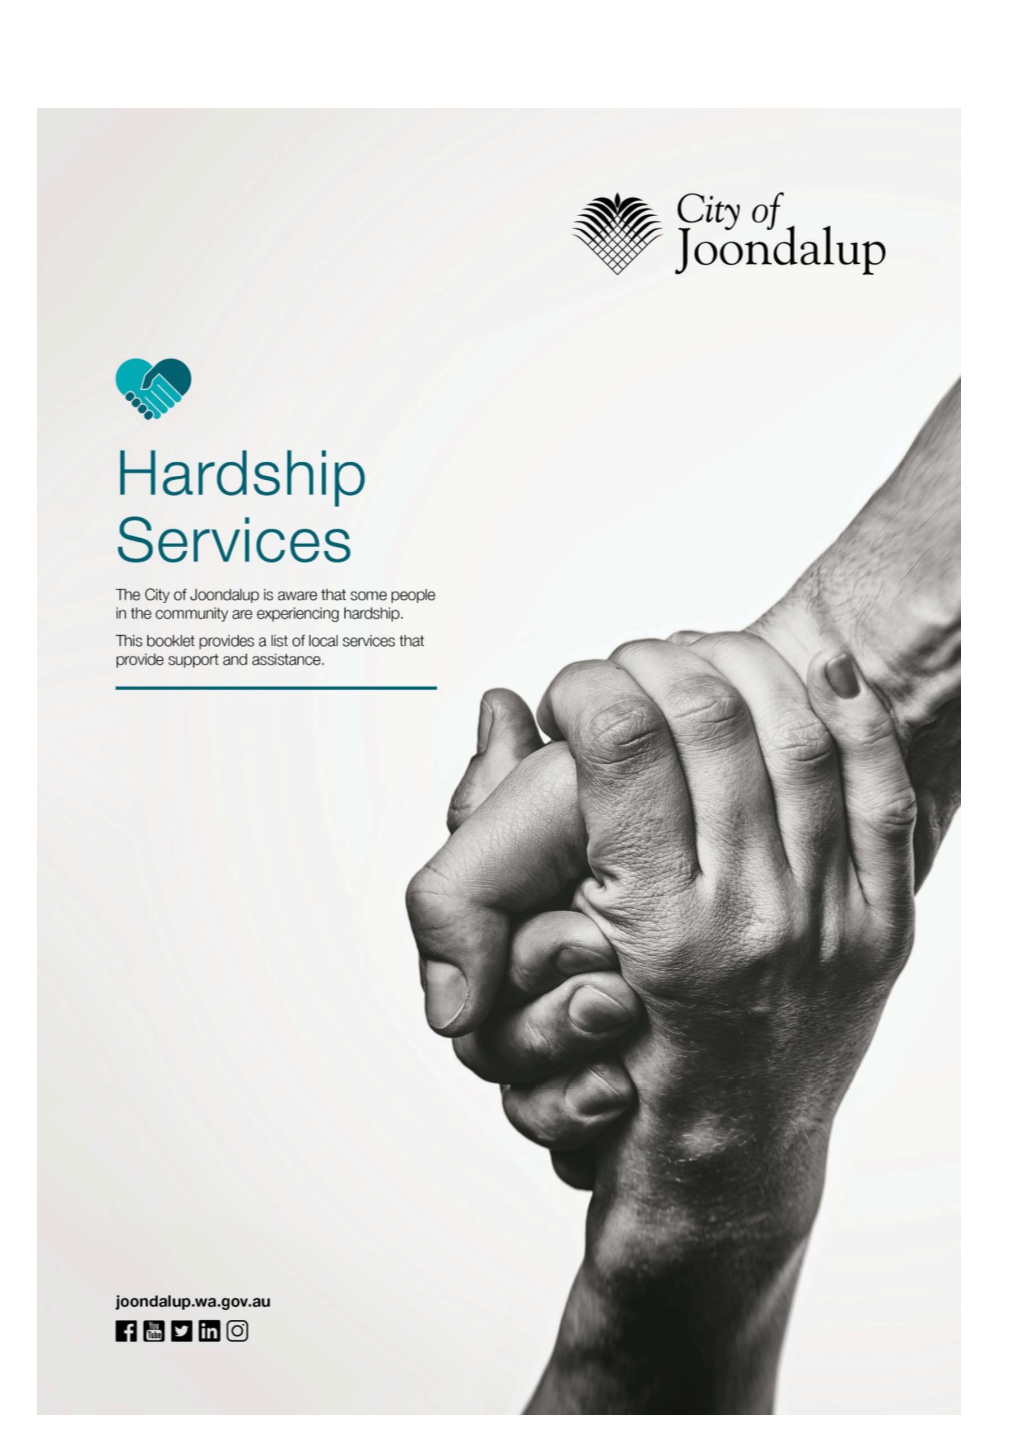 City of Joondalup Hardship Services